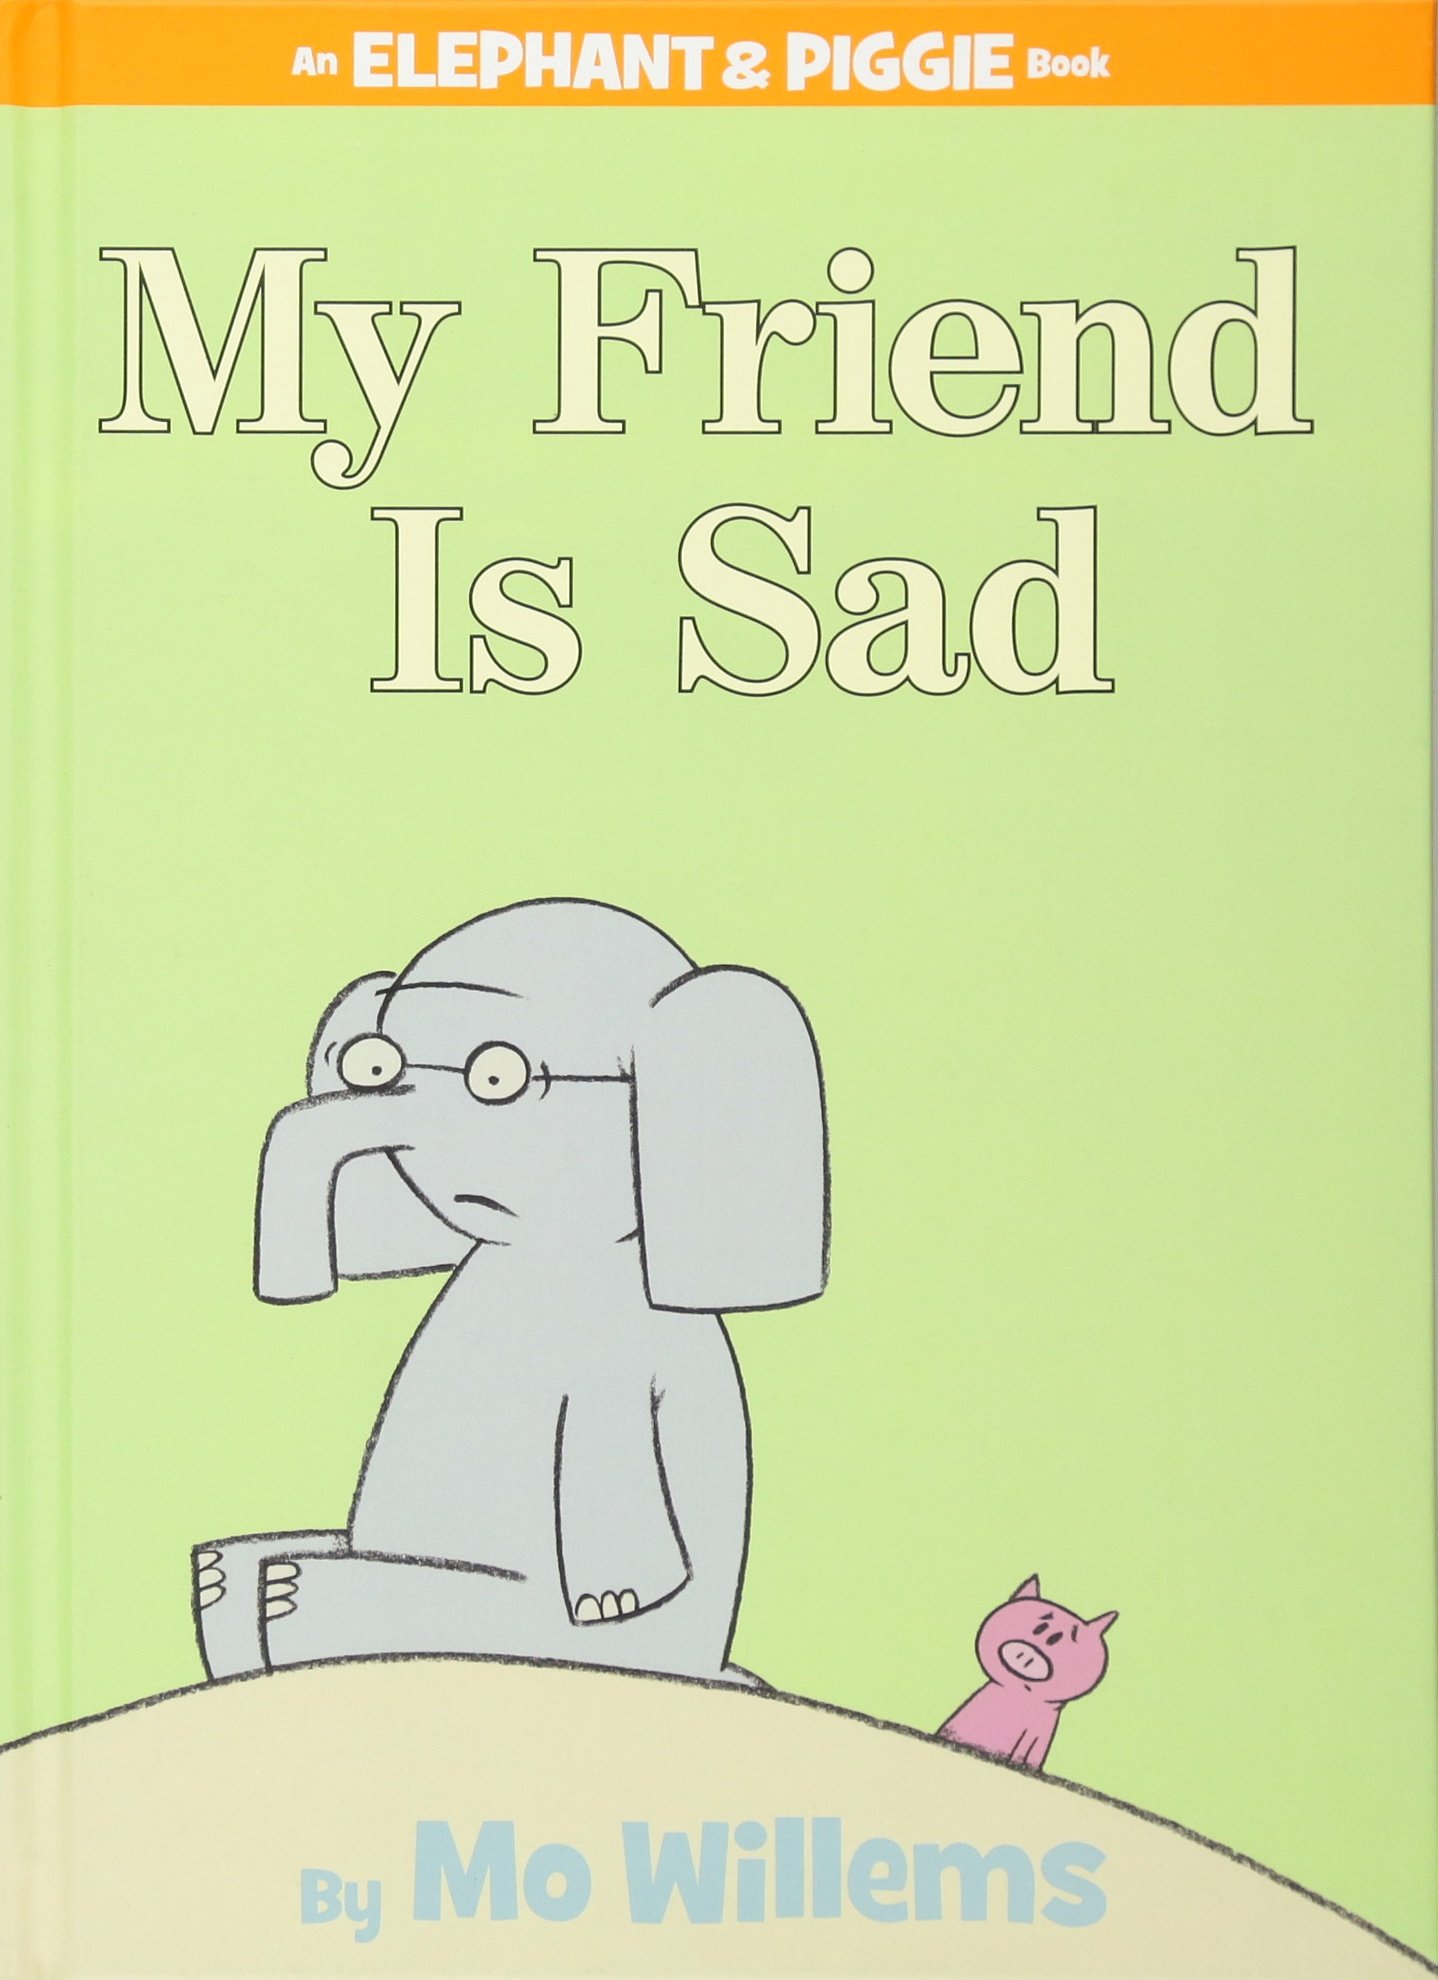 Elephant and Piggie. Sad friend. Pete the Cat, Elephant and Piggy by mo Willems. Color and create your ownstory with elephand and Piggle fom mo Willems.